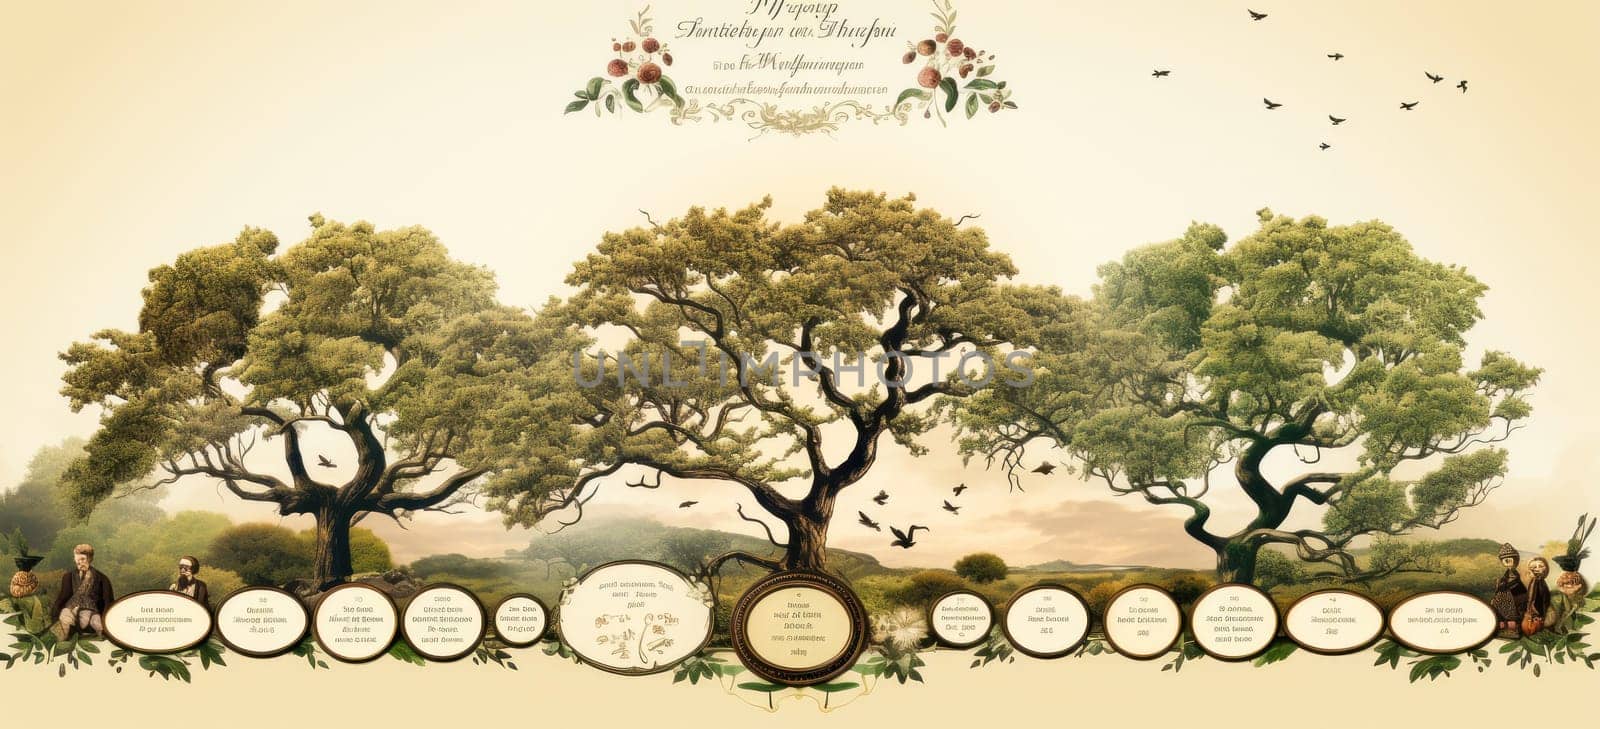 Original postcard design with family tree and ovals by Yurich32